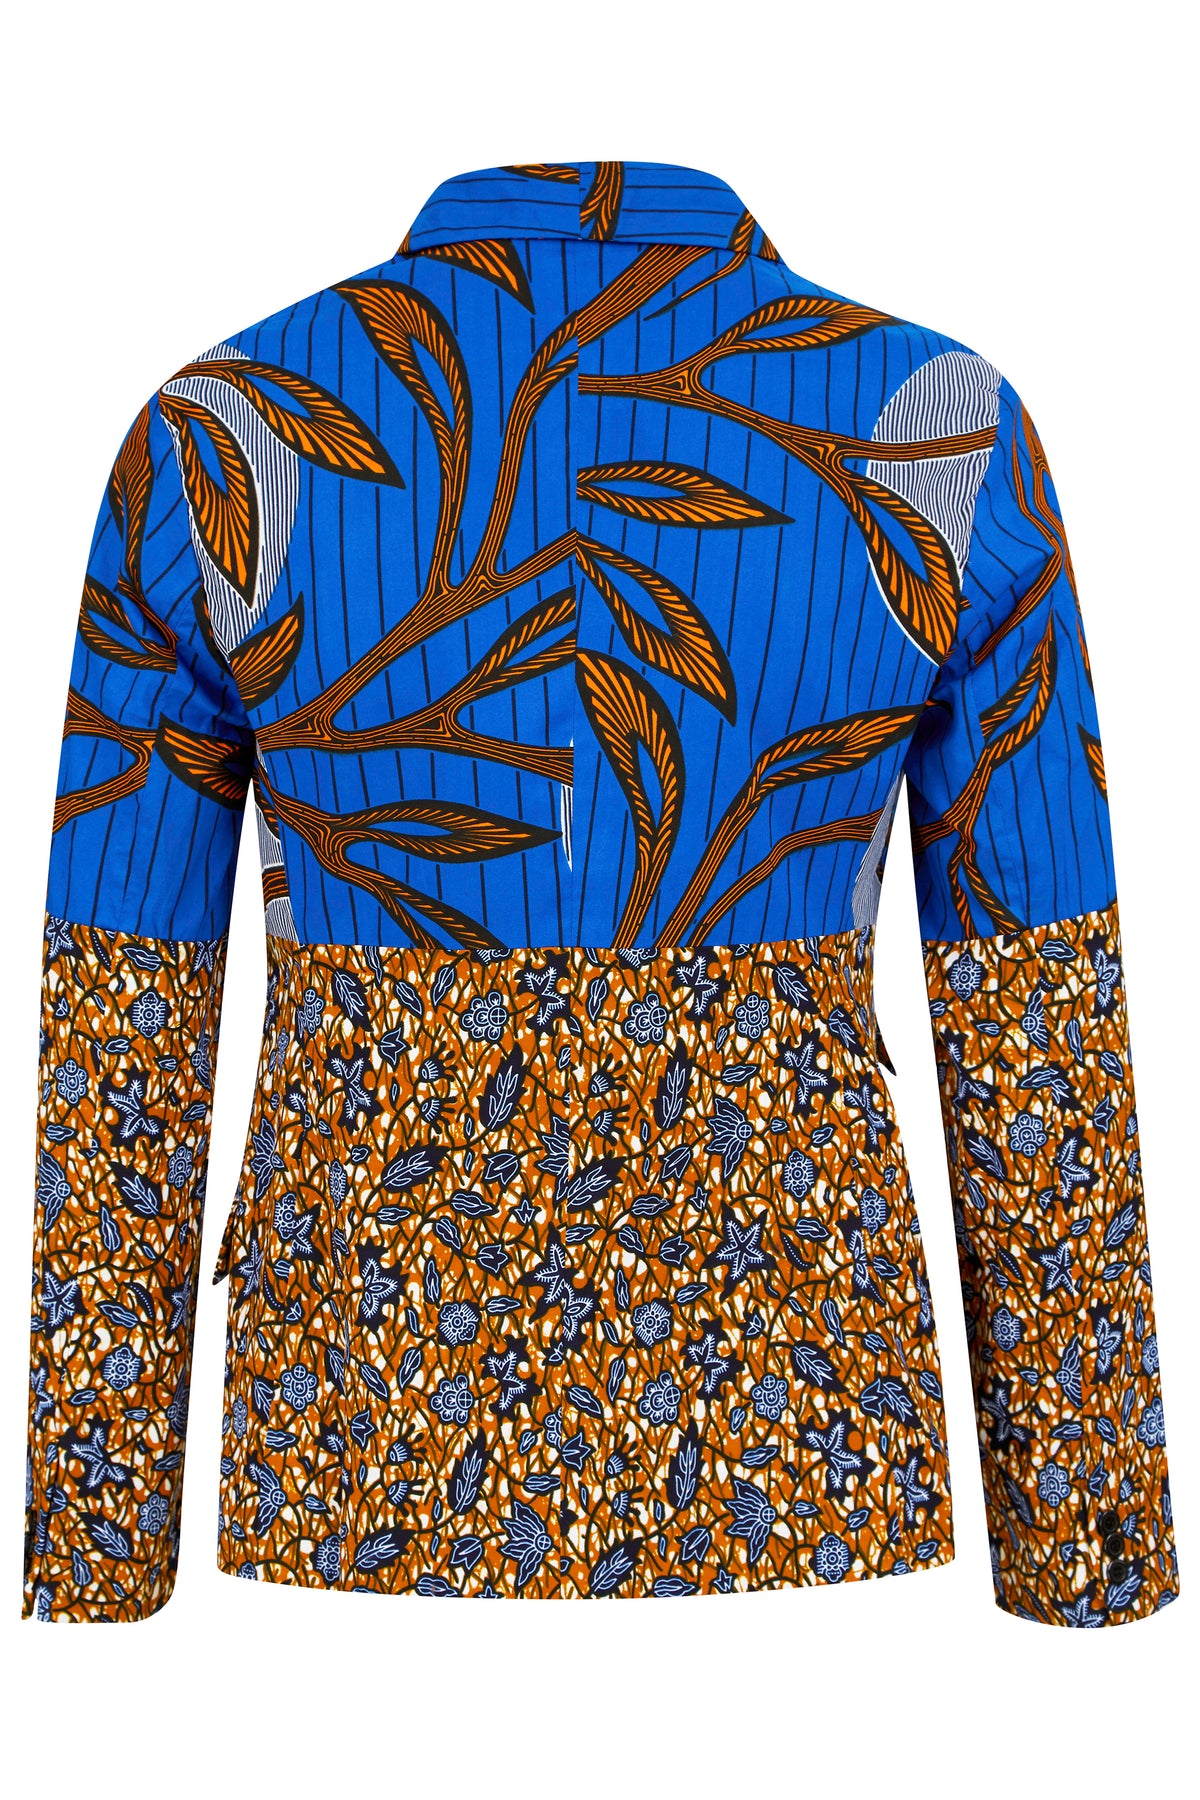 Joshua Print Clash African Print suit- Royal Blue - OHEMA OHENE AFRICAN INSPIRED FASHION